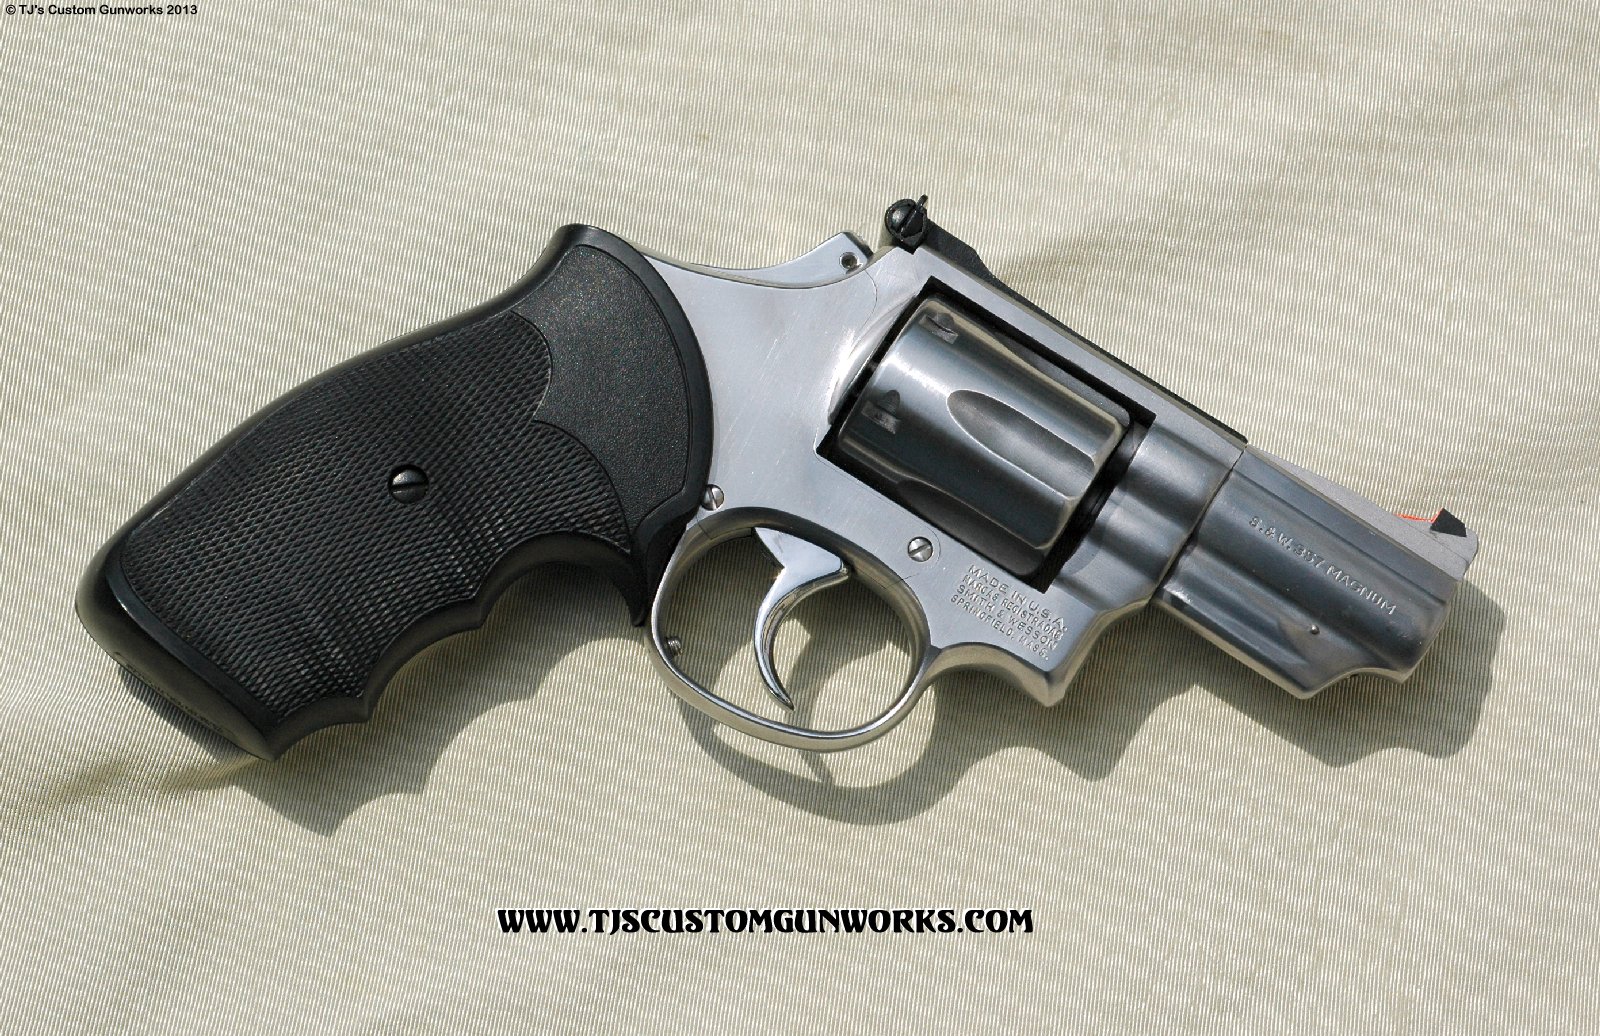 S&W Model 66 Snubby Custom Carry Melted Combat Revolver